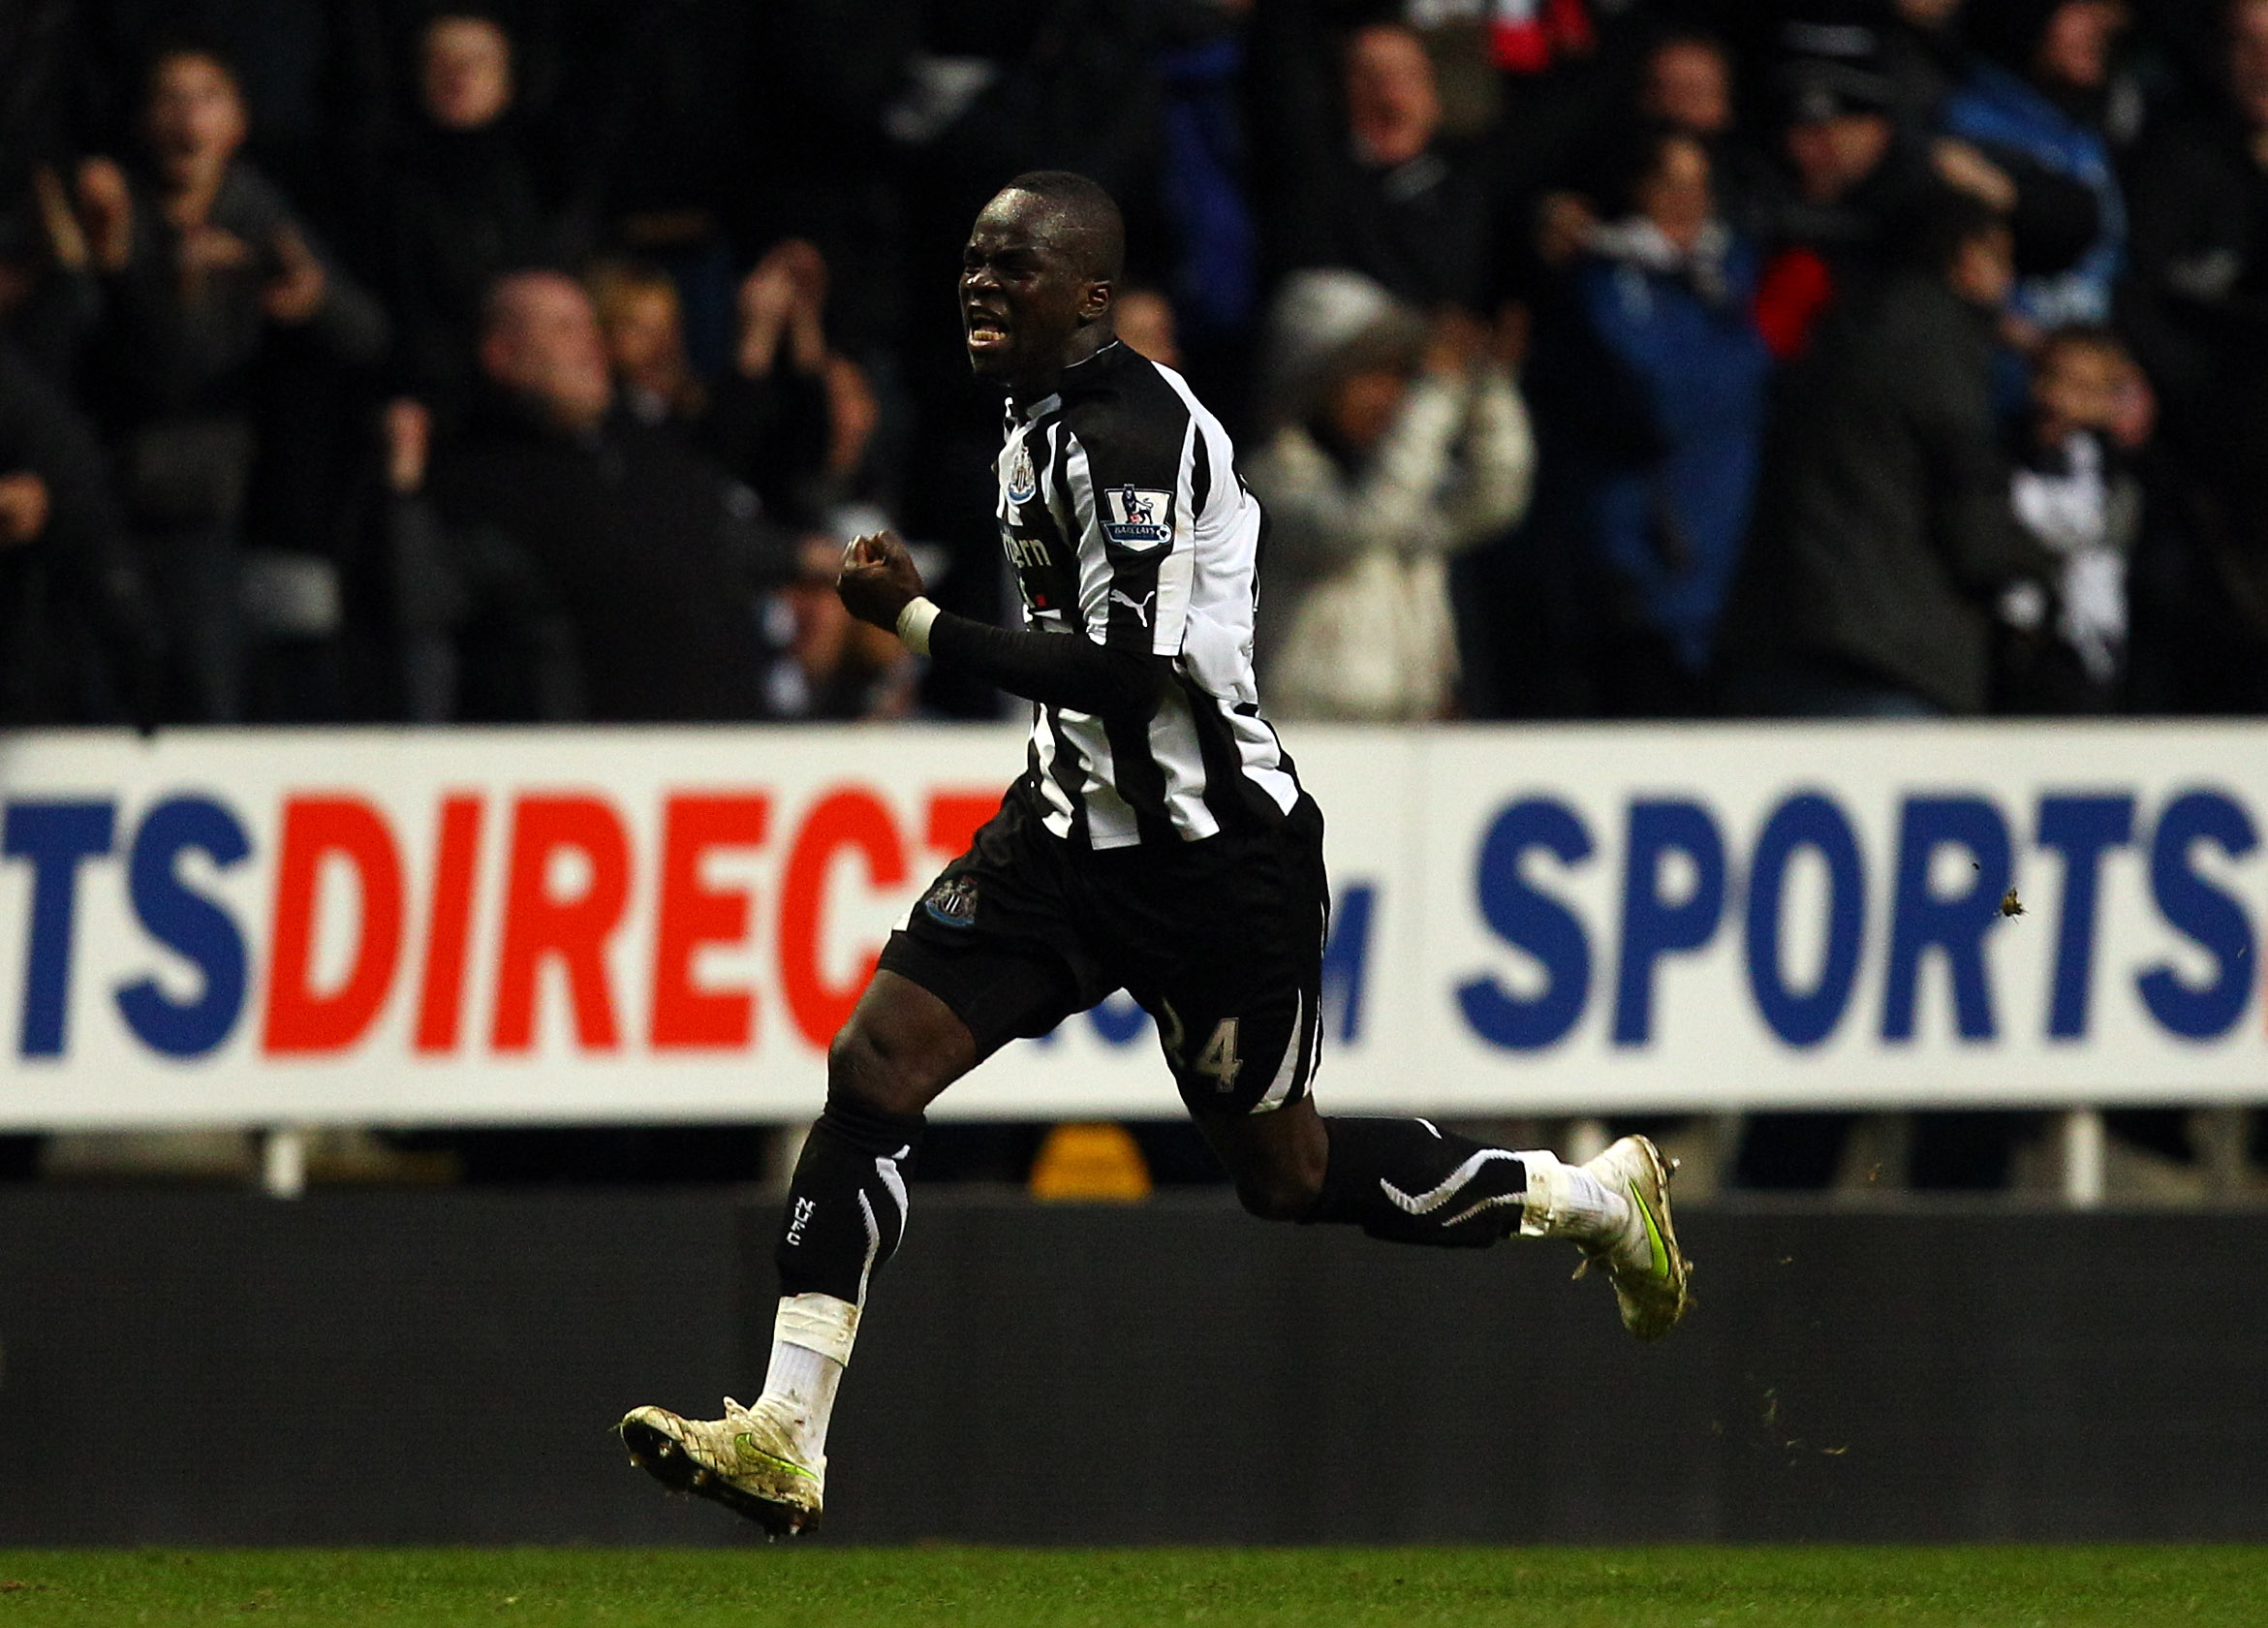 NEWCASTLE UPON TYNE, ENGLAND - FEBRUARY 05:  Cheik Tiote of Newcastle celebrates scoring the fourth and equalising goal during the Barclays Premier League match between Newcastle United and Arsenal at St James' Park on February 5, 2011 in Newcastle upon T